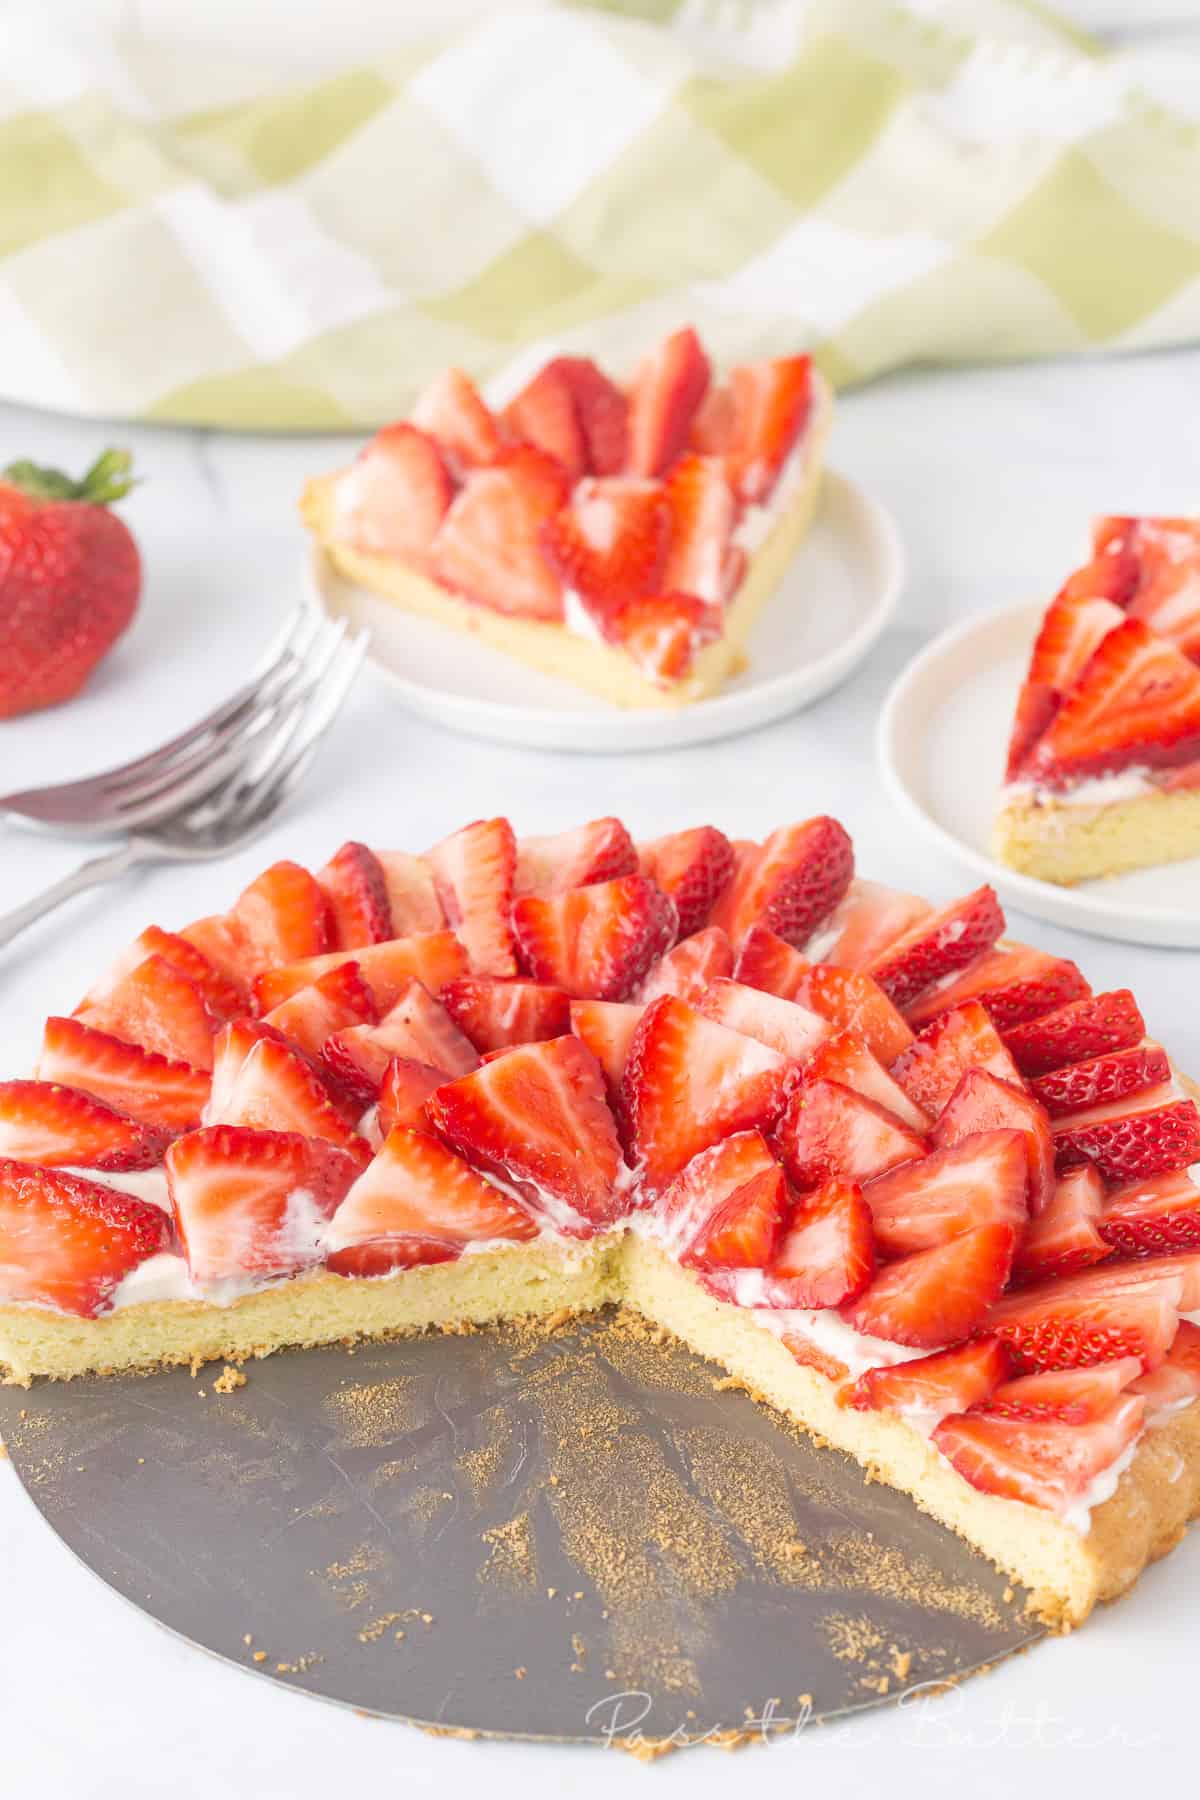 View of strawberry flan with two pieces cut out and showcasing the layers of strawberries.